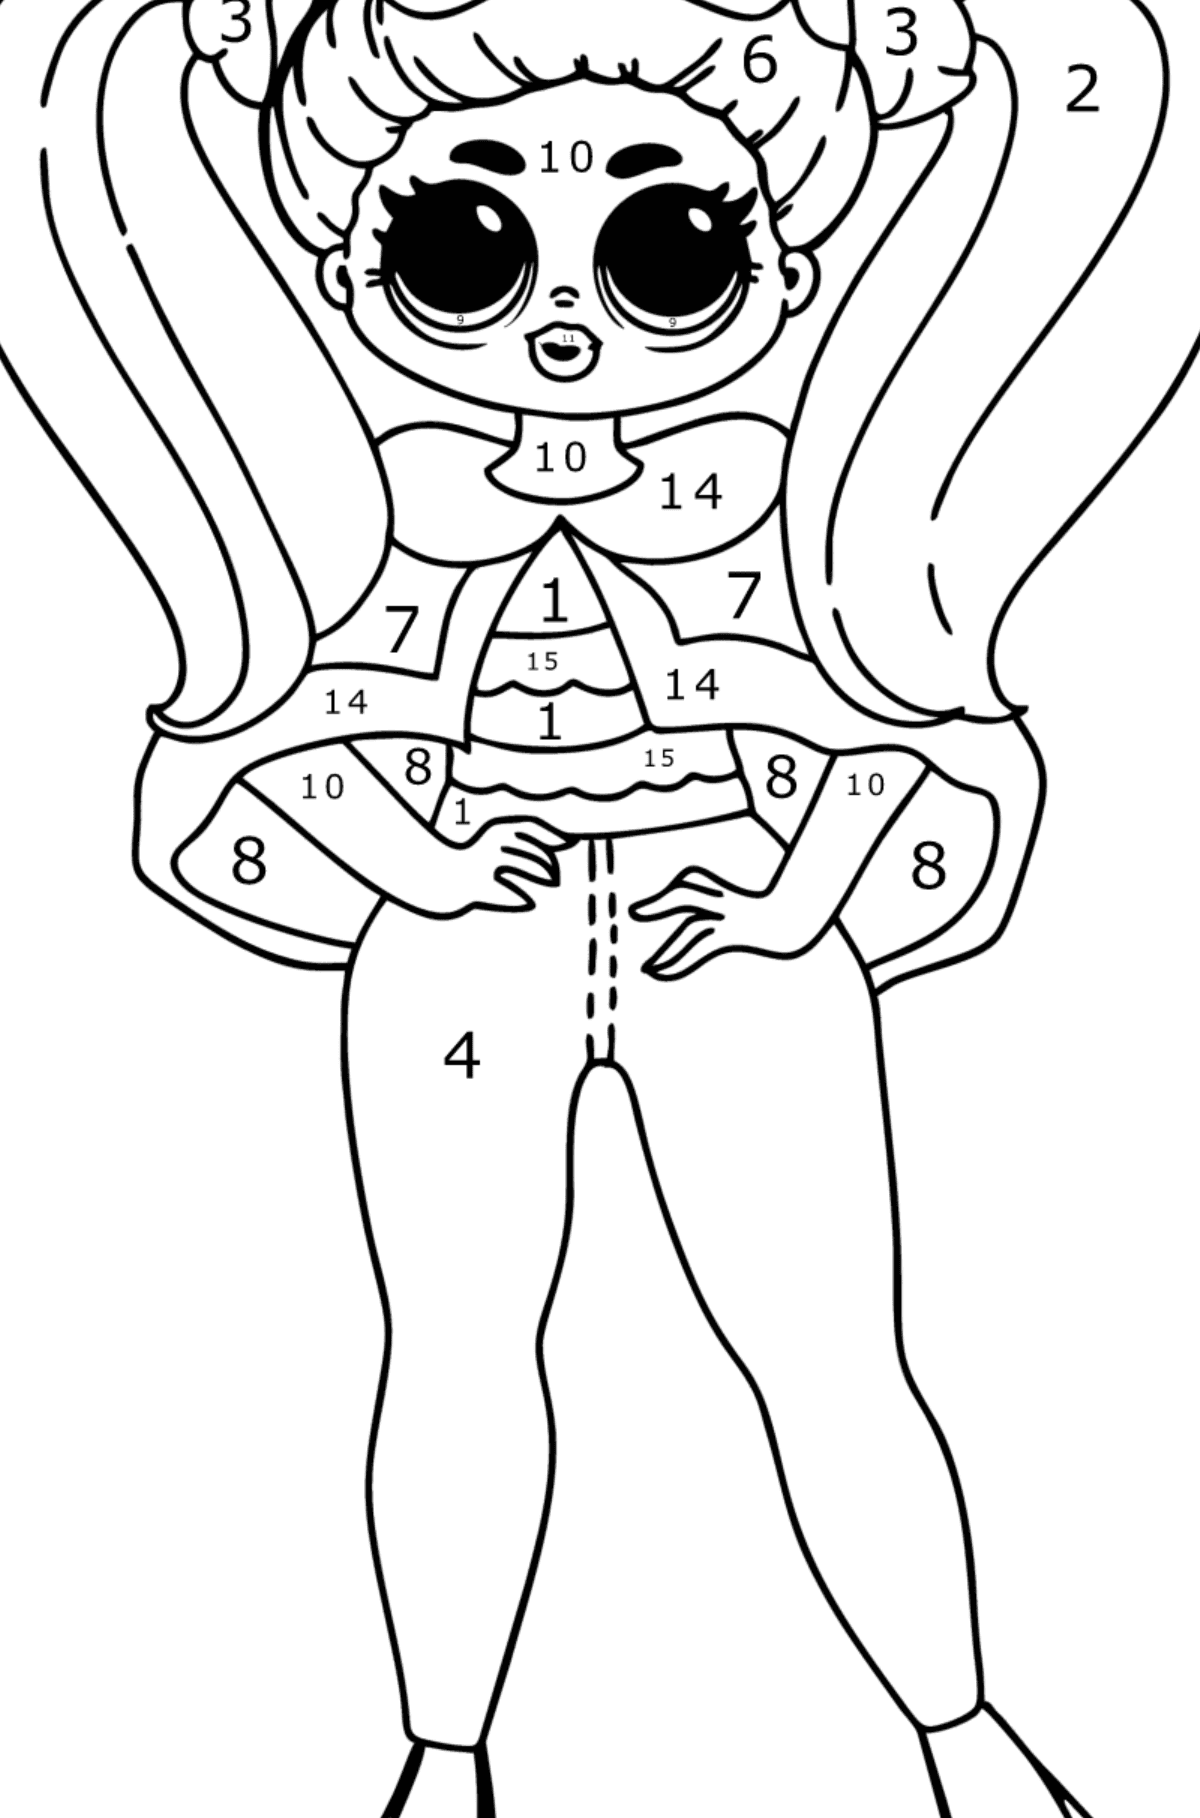 Coloring page LOL Surprise OMG - Coloring by Numbers for Kids